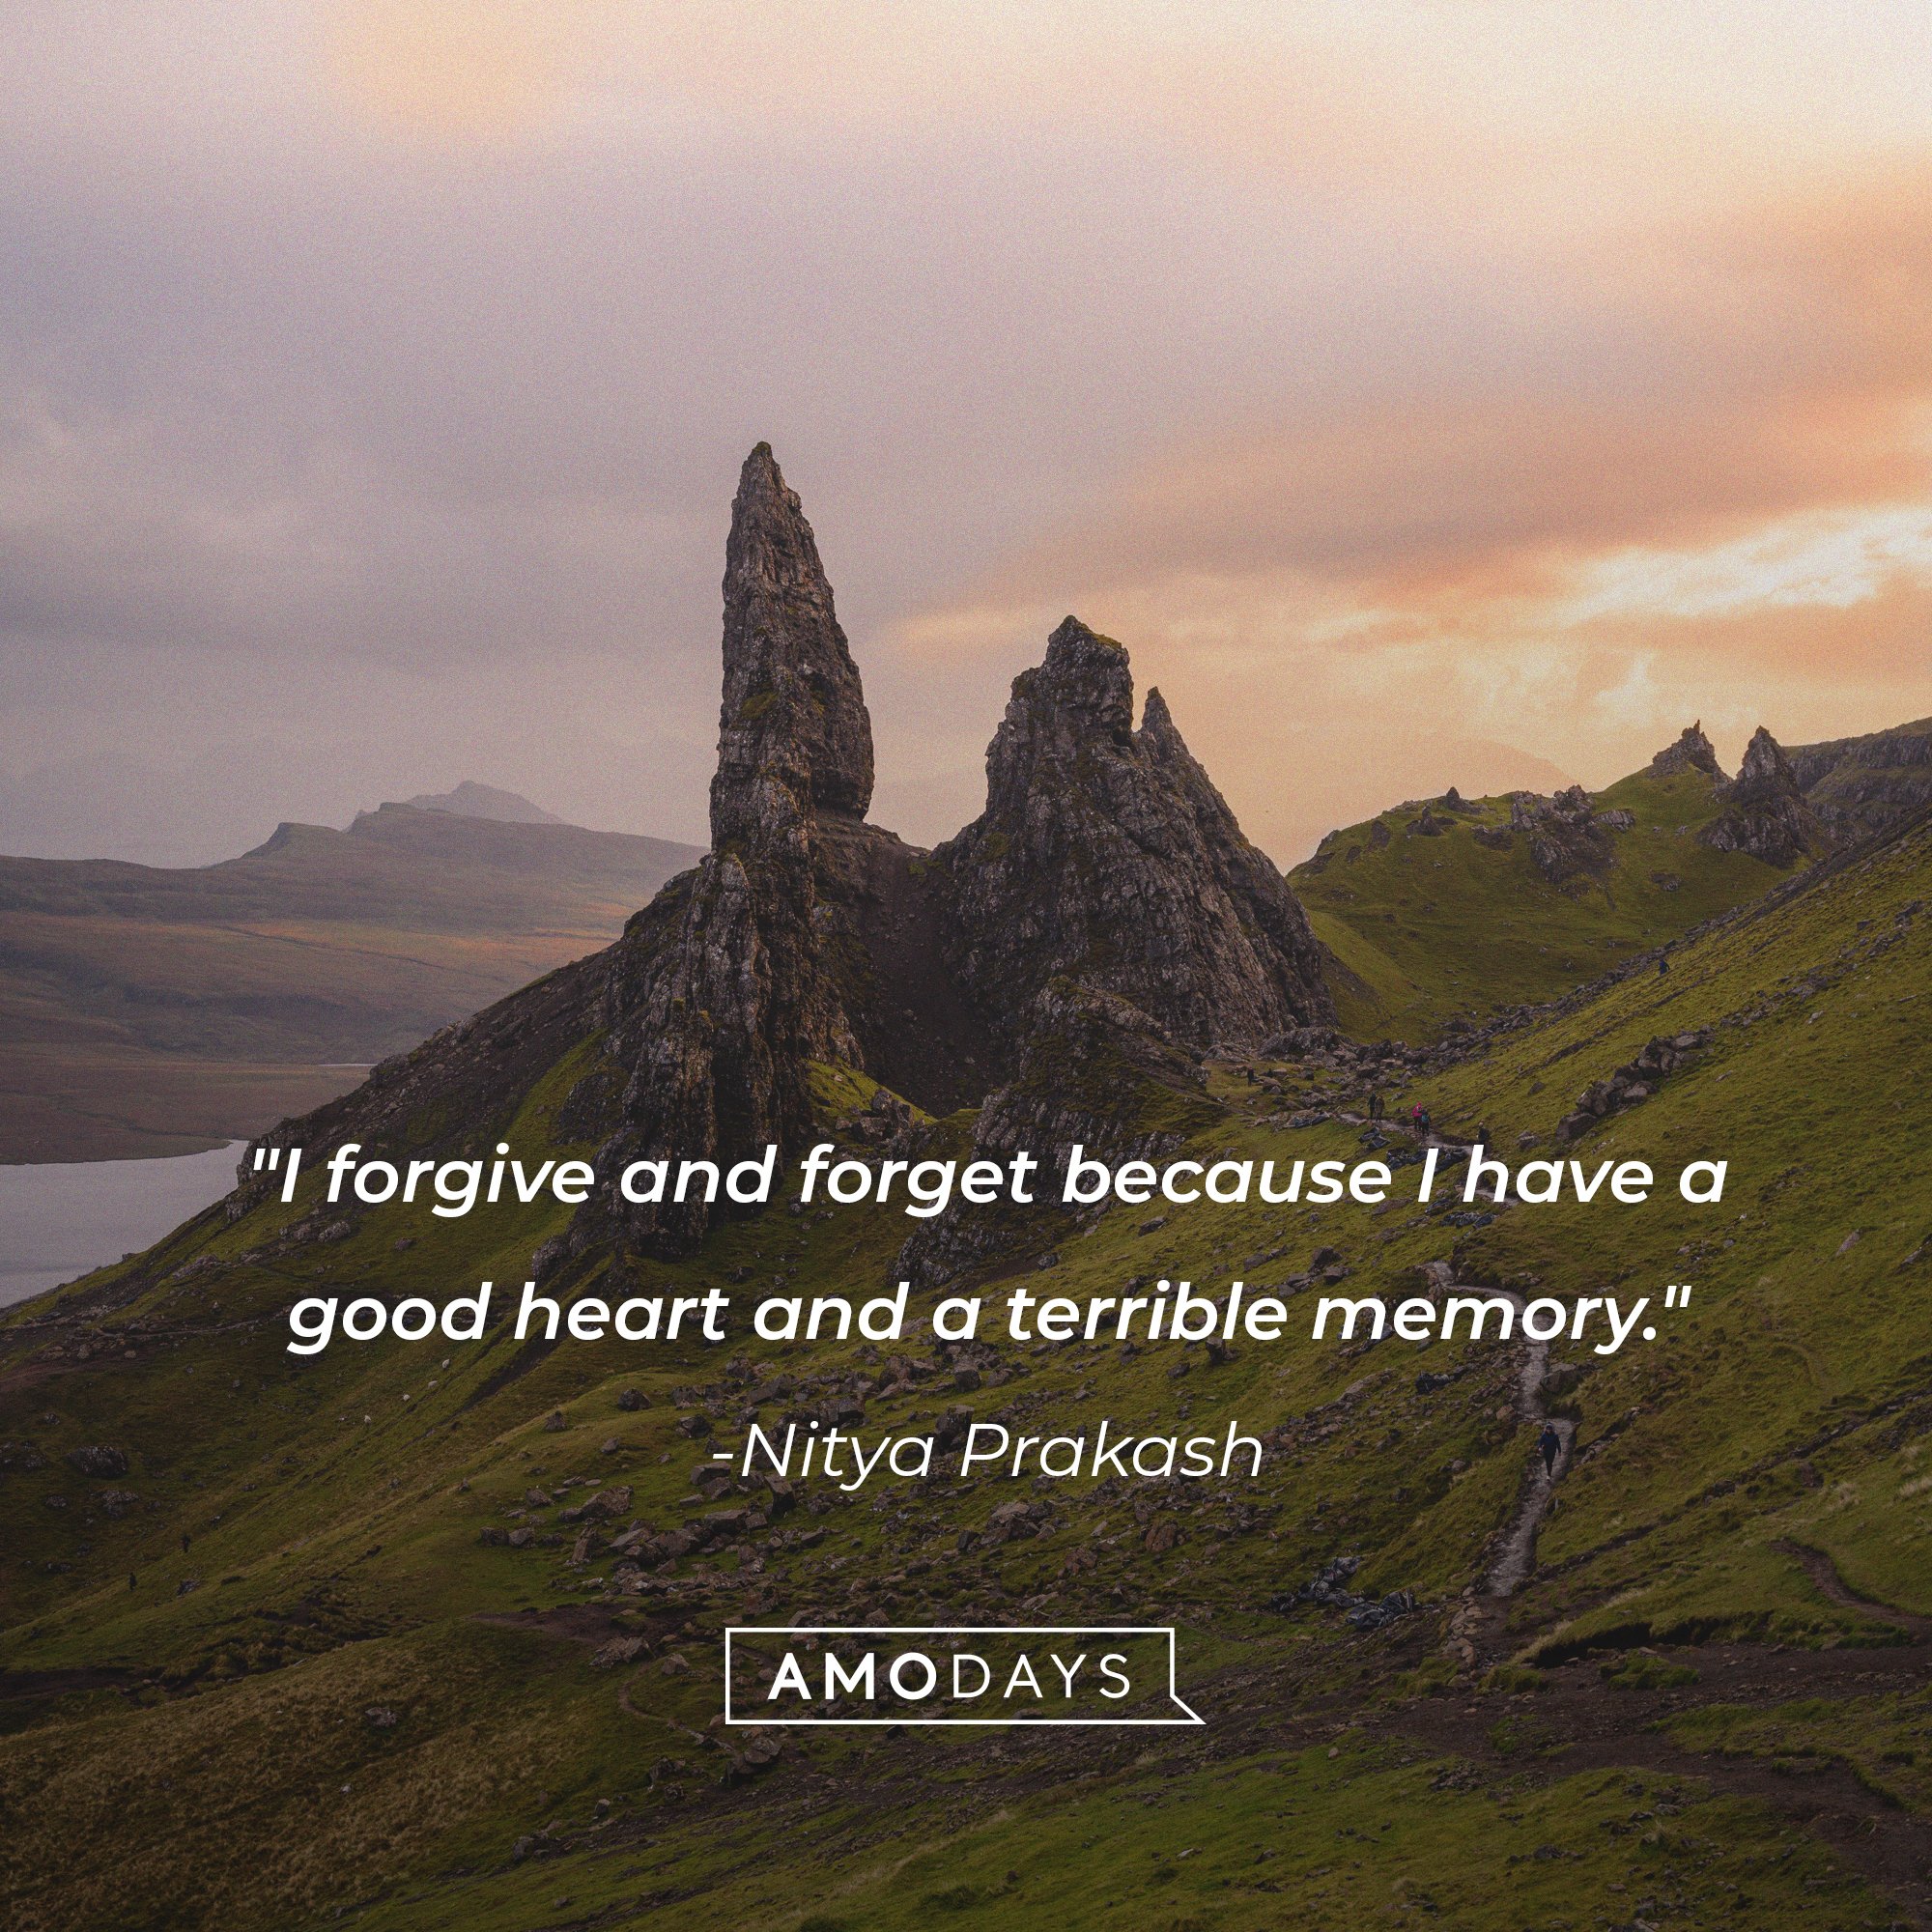 Nitya Prakash’s quote: "I forgive and forget because I have a good heart and a terrible memory." | Image: AmoDays